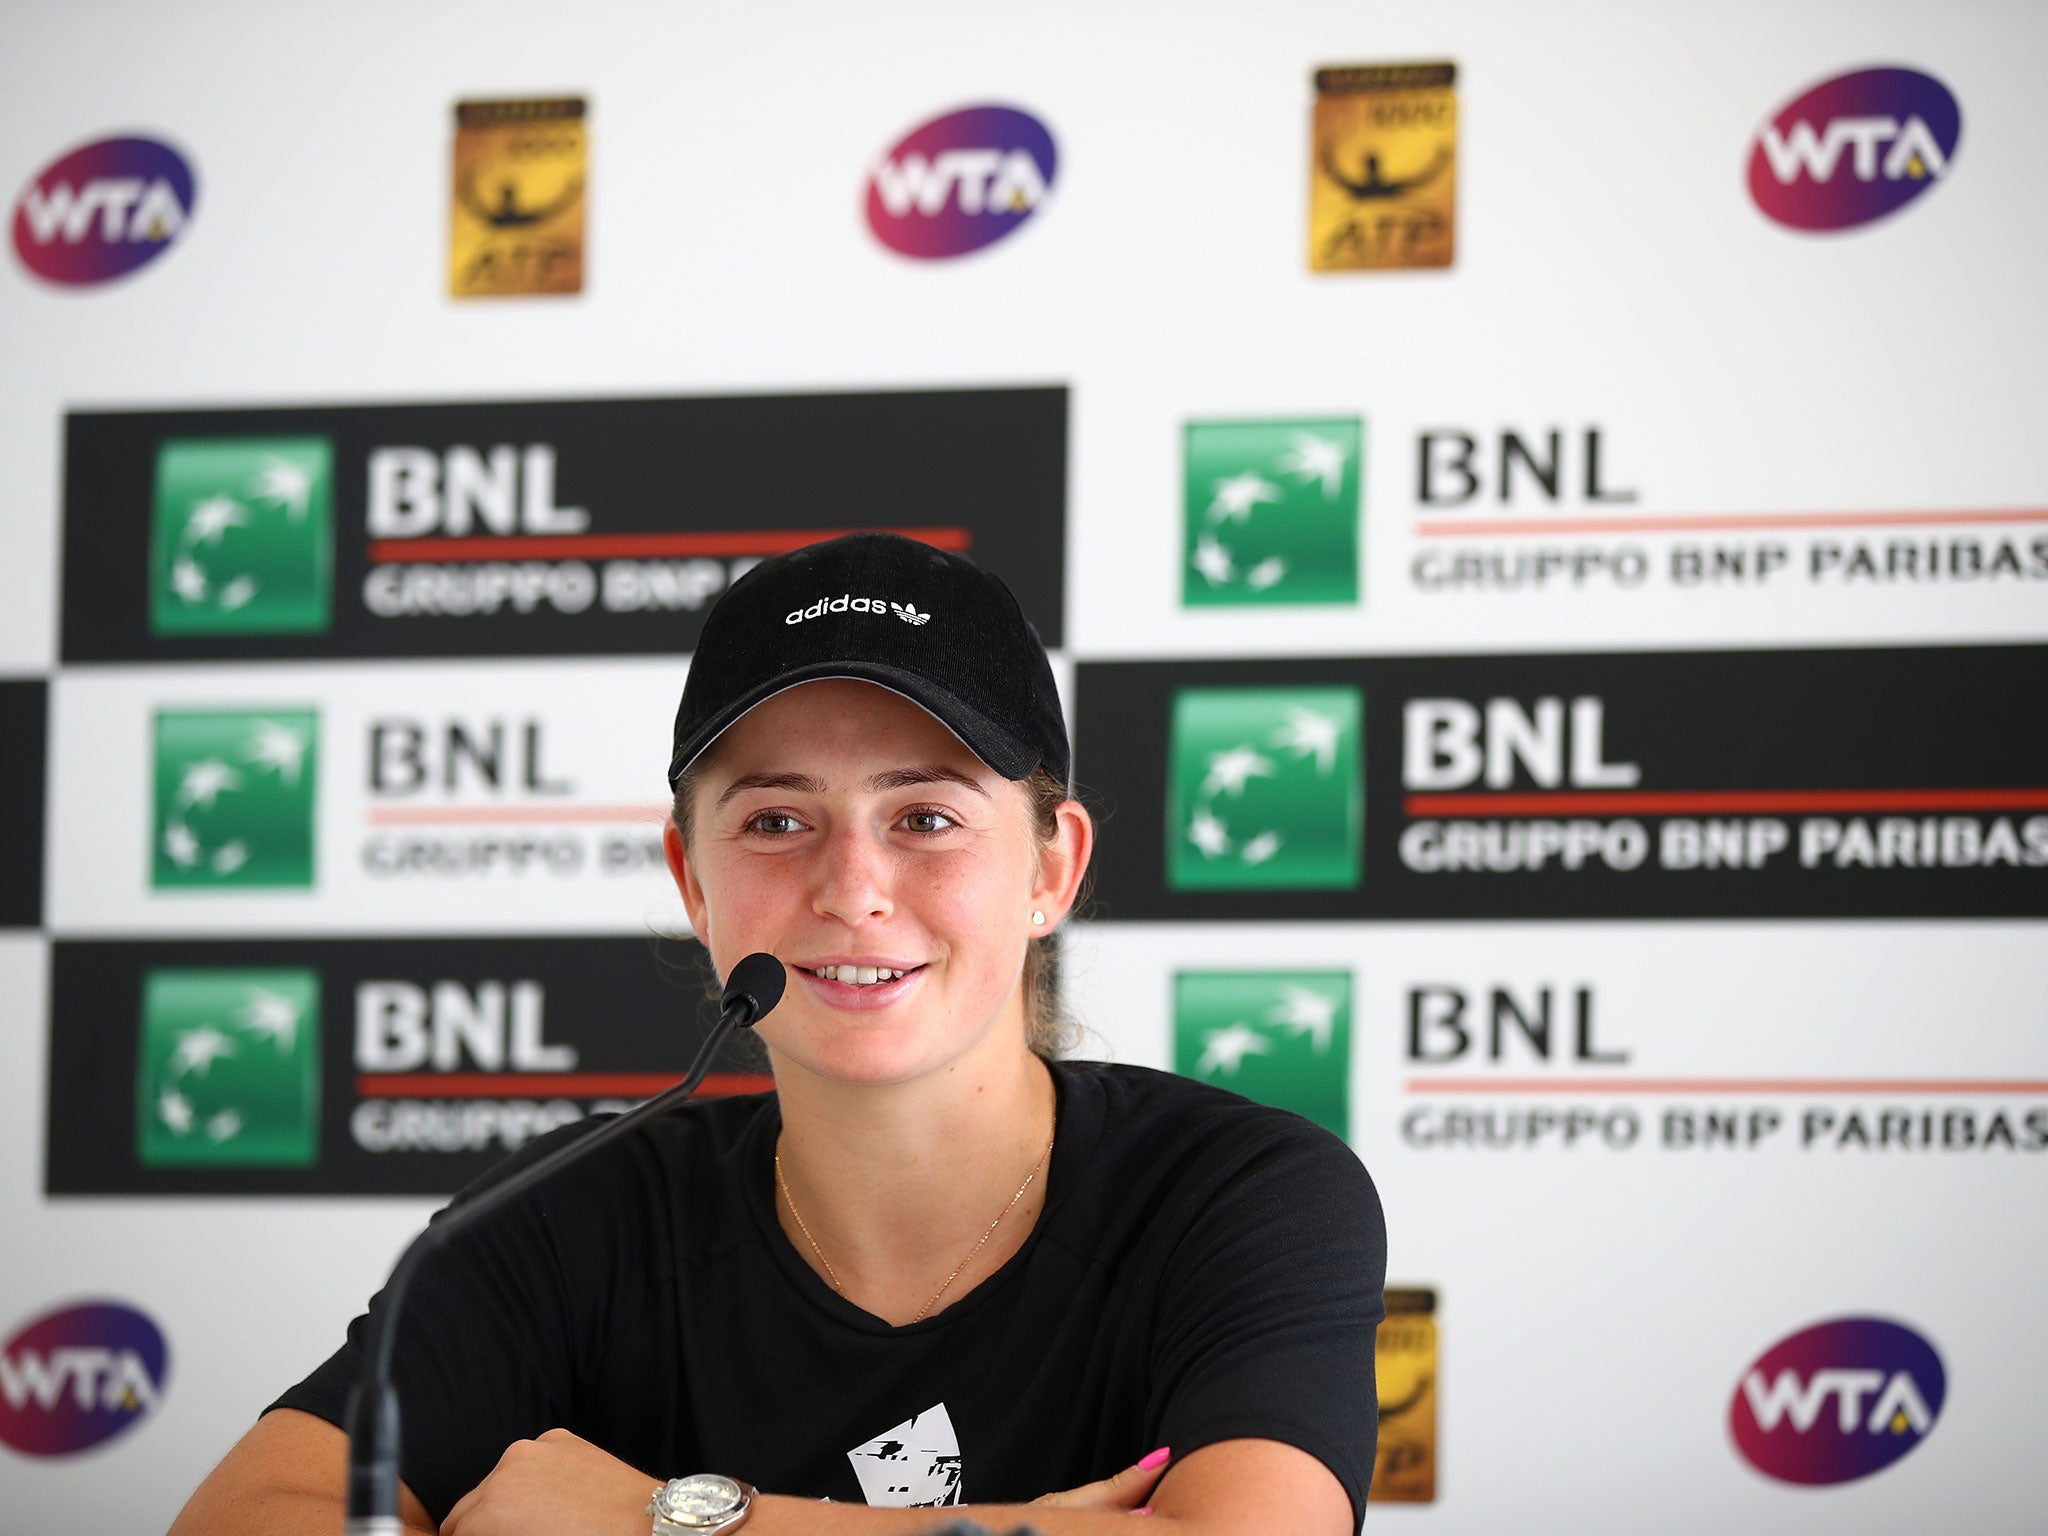 There is a youthful exuberance about Ostapenko, who will turn 21 early next month